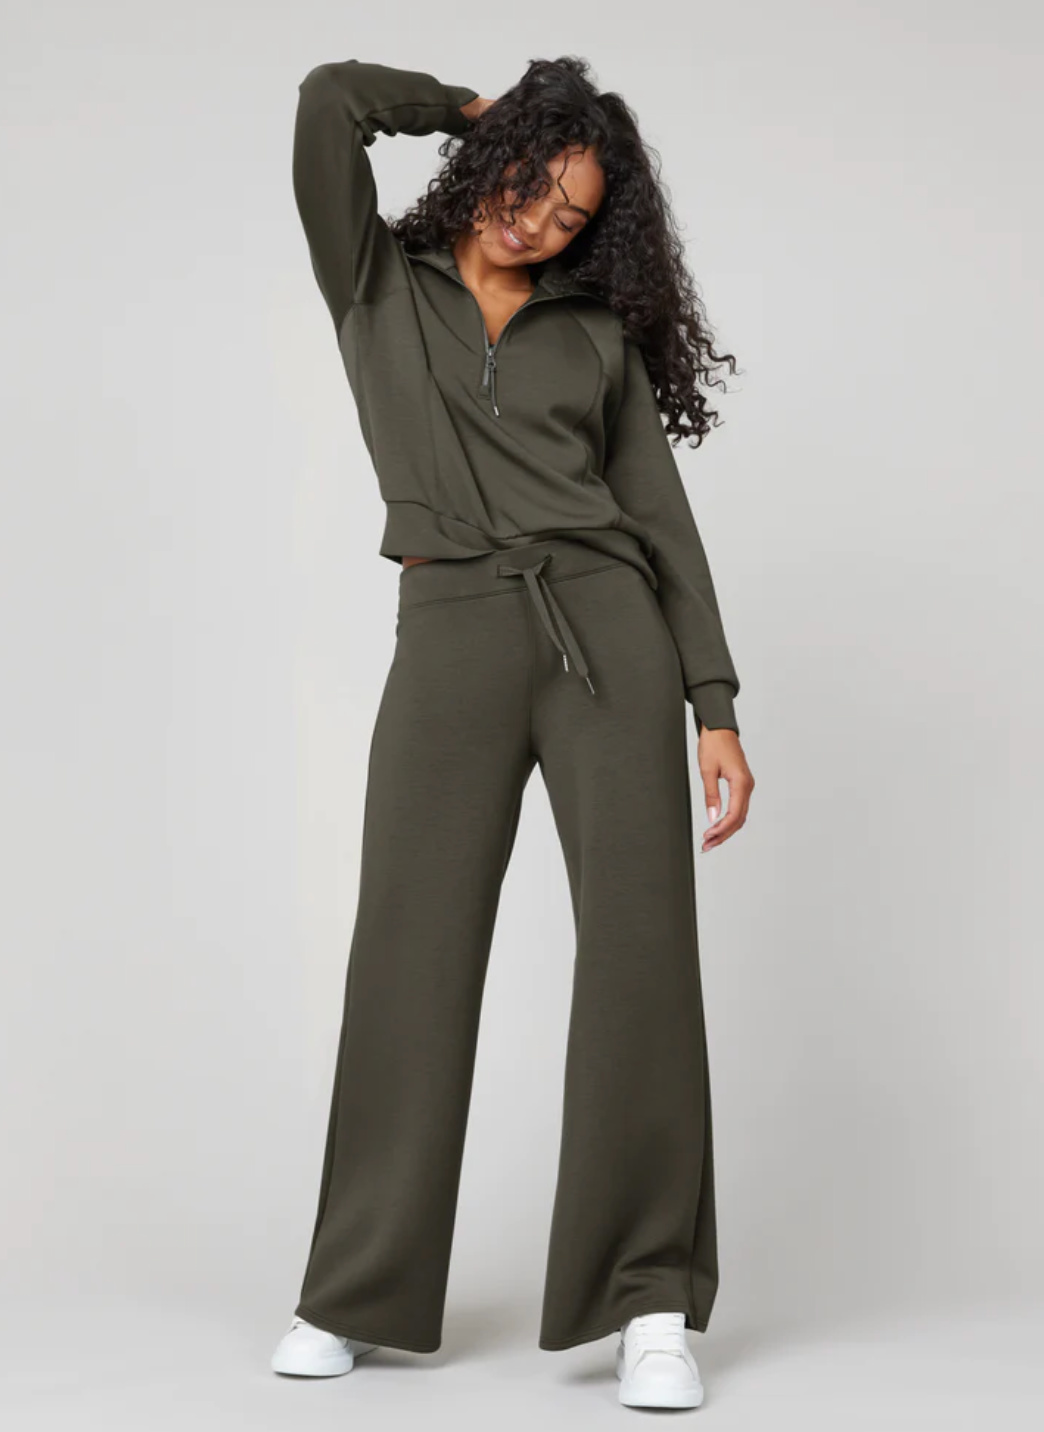 The Comfiest Airplane Pants for Travel